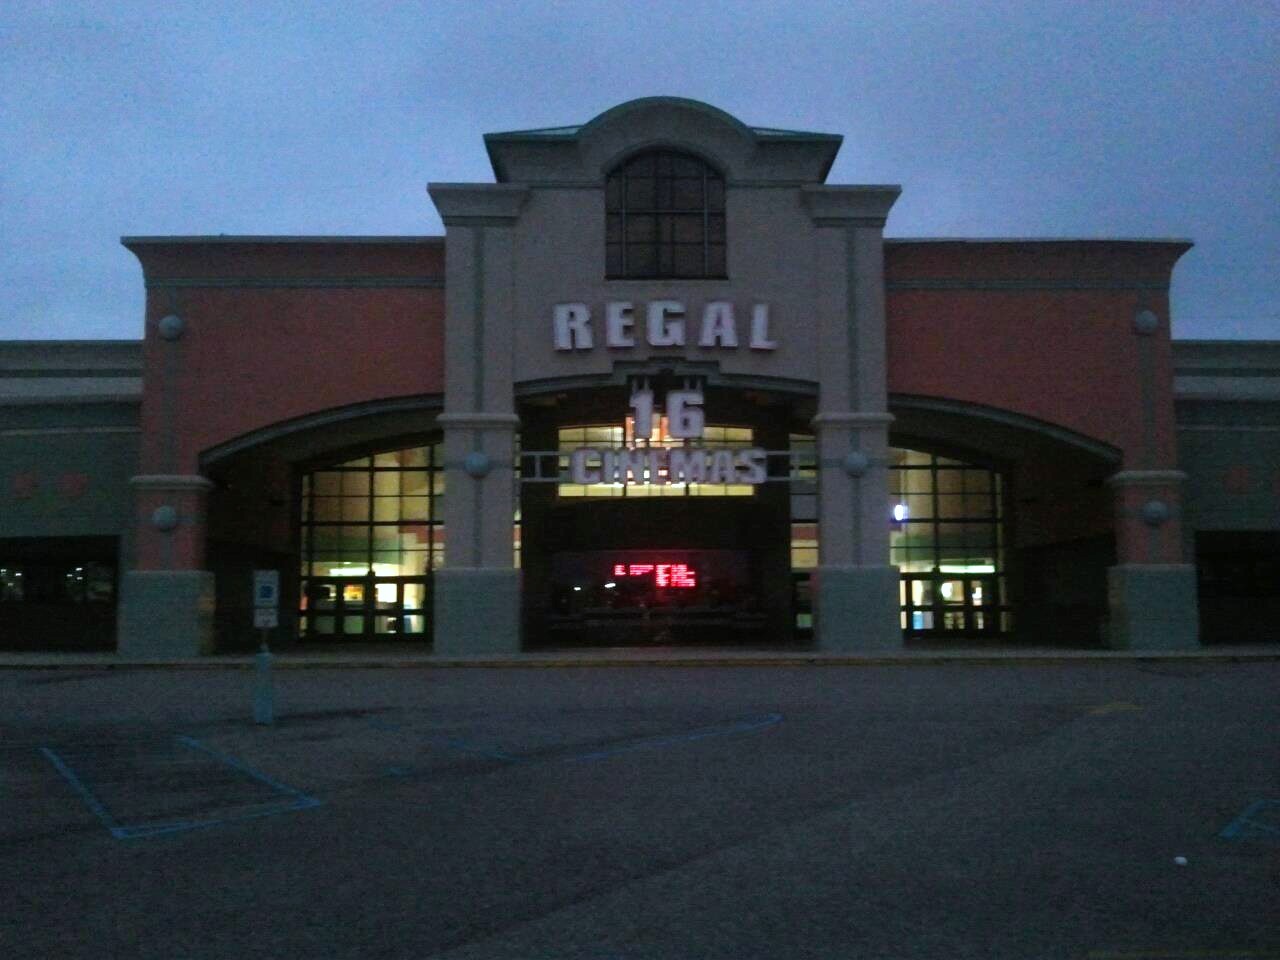 Regal theaters shutting down Oct. 8, Trussville location included